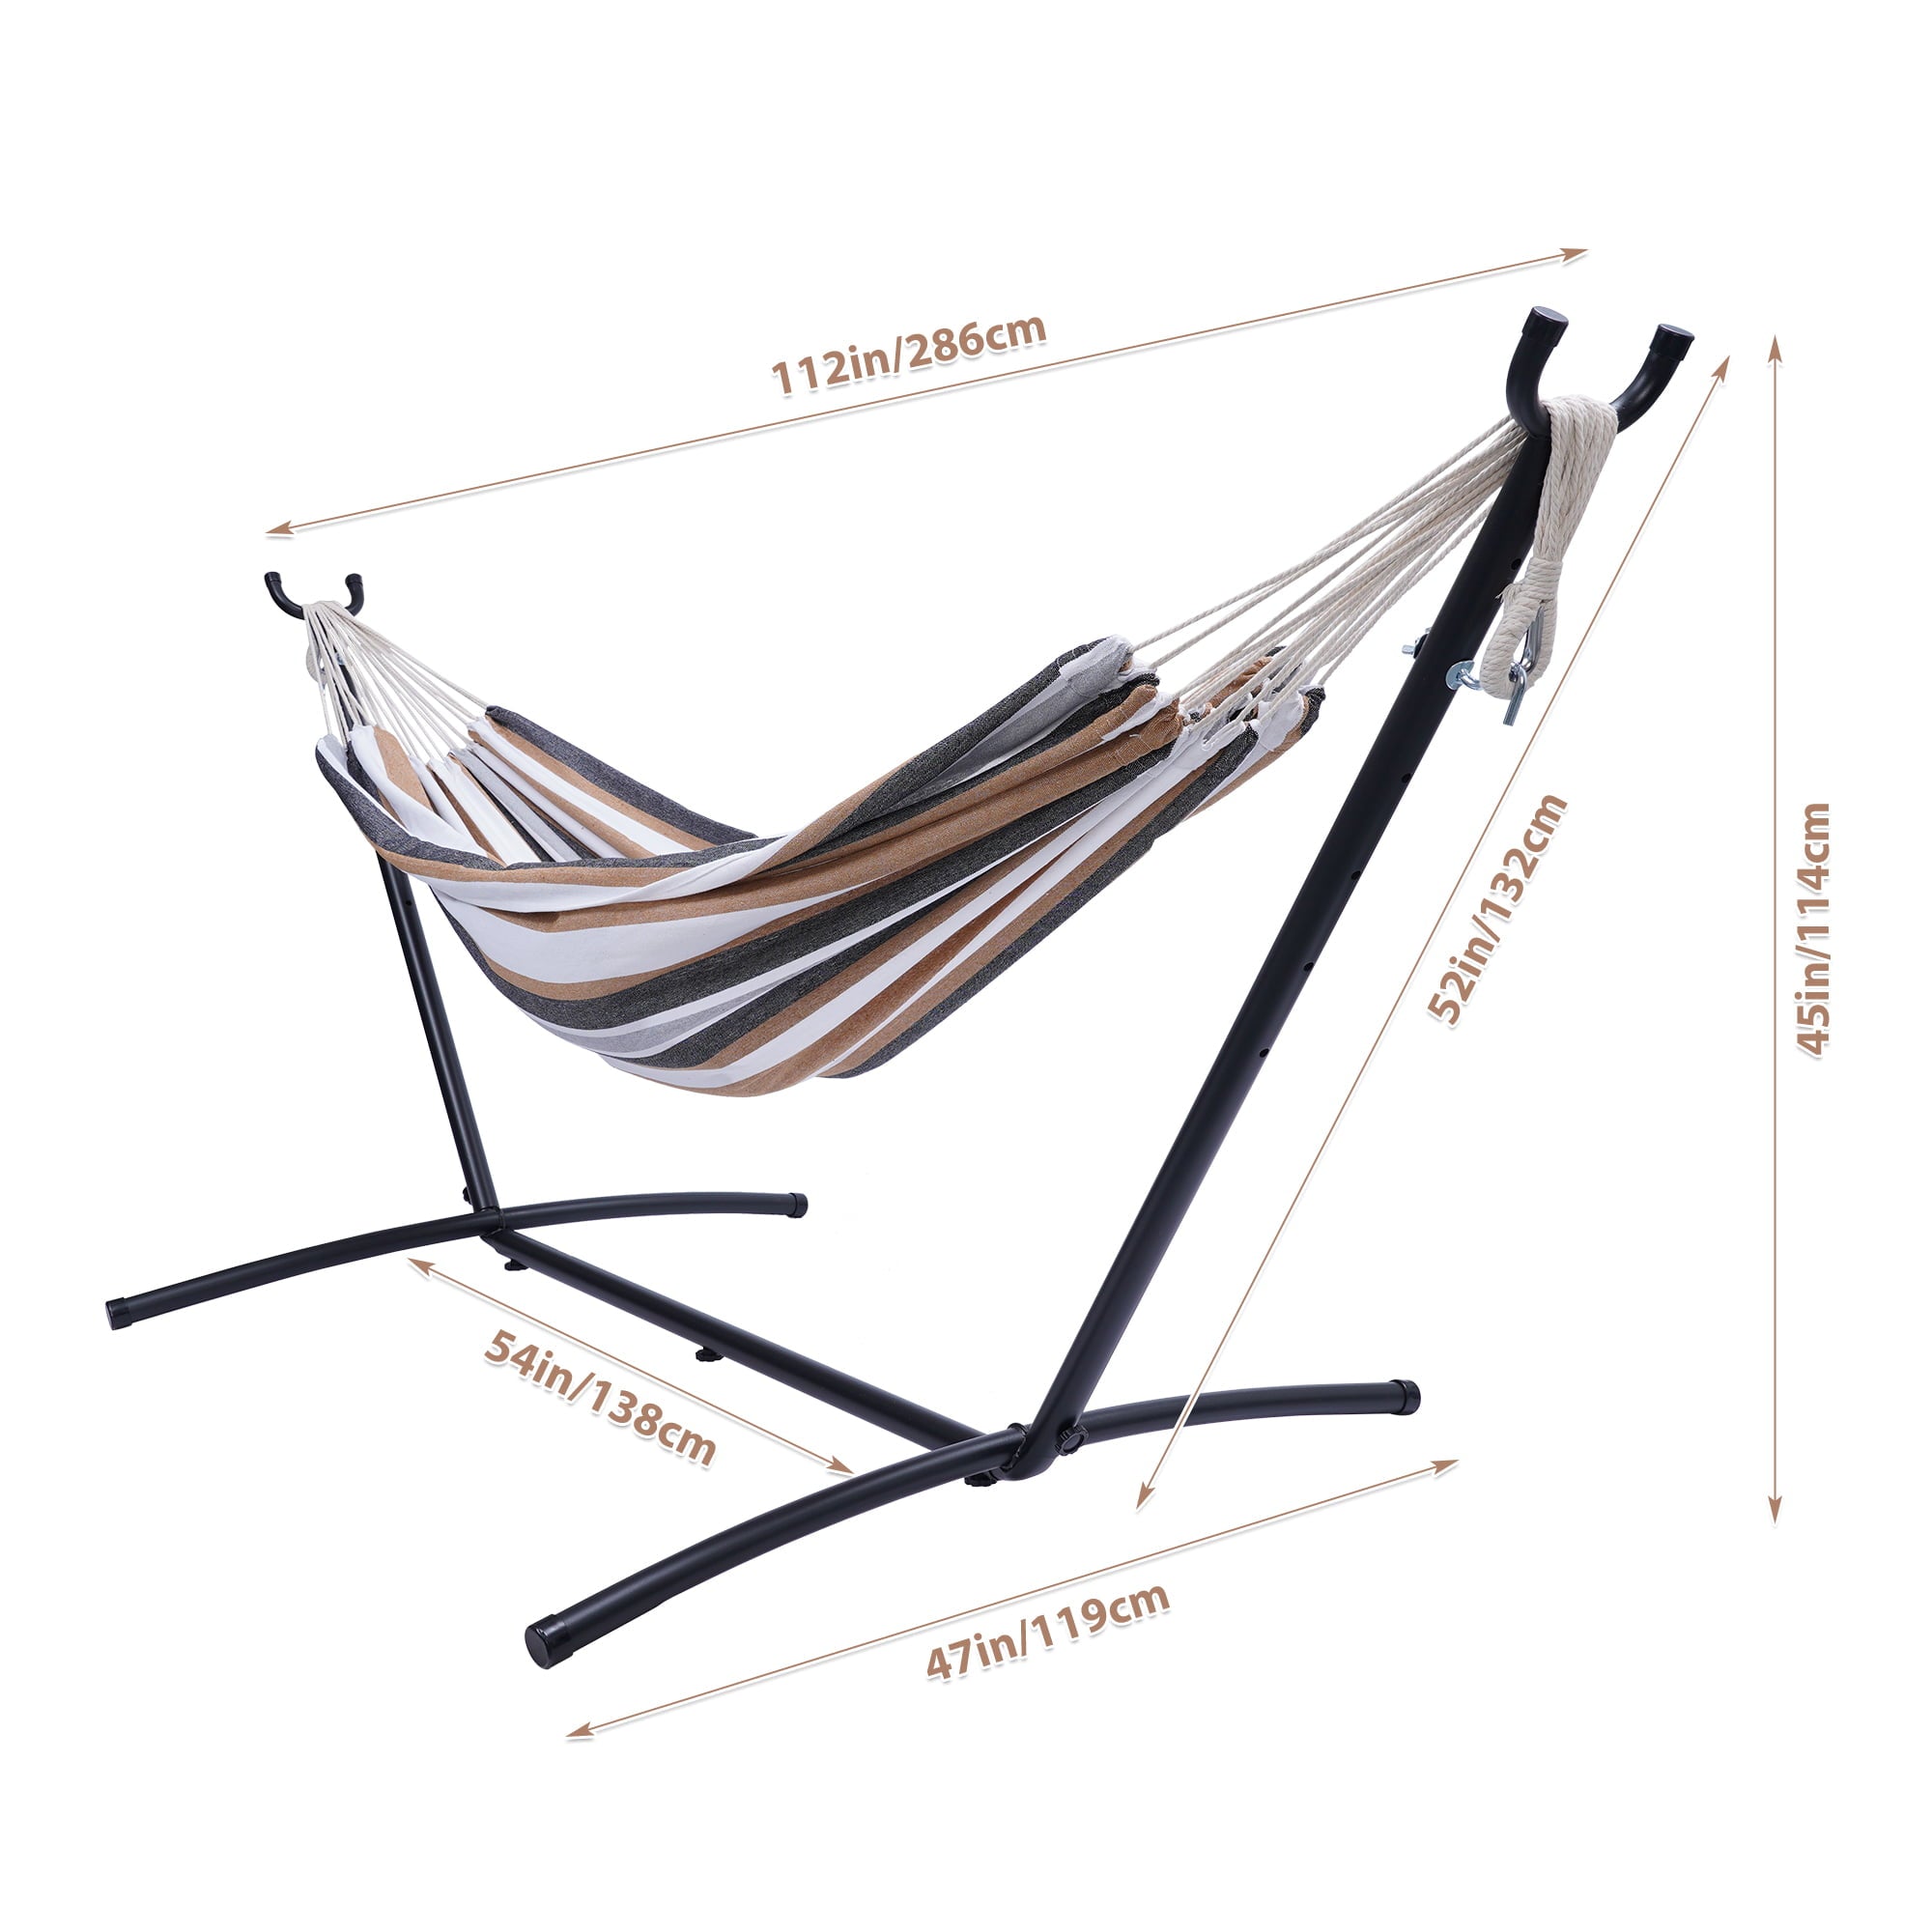 Outdoor Patio Yard Beach Double Hammock Or Indoor with Carrying Case, Portable Hammock with Stand, Heavy Duty Steel Frame, Brown/Grey Striped